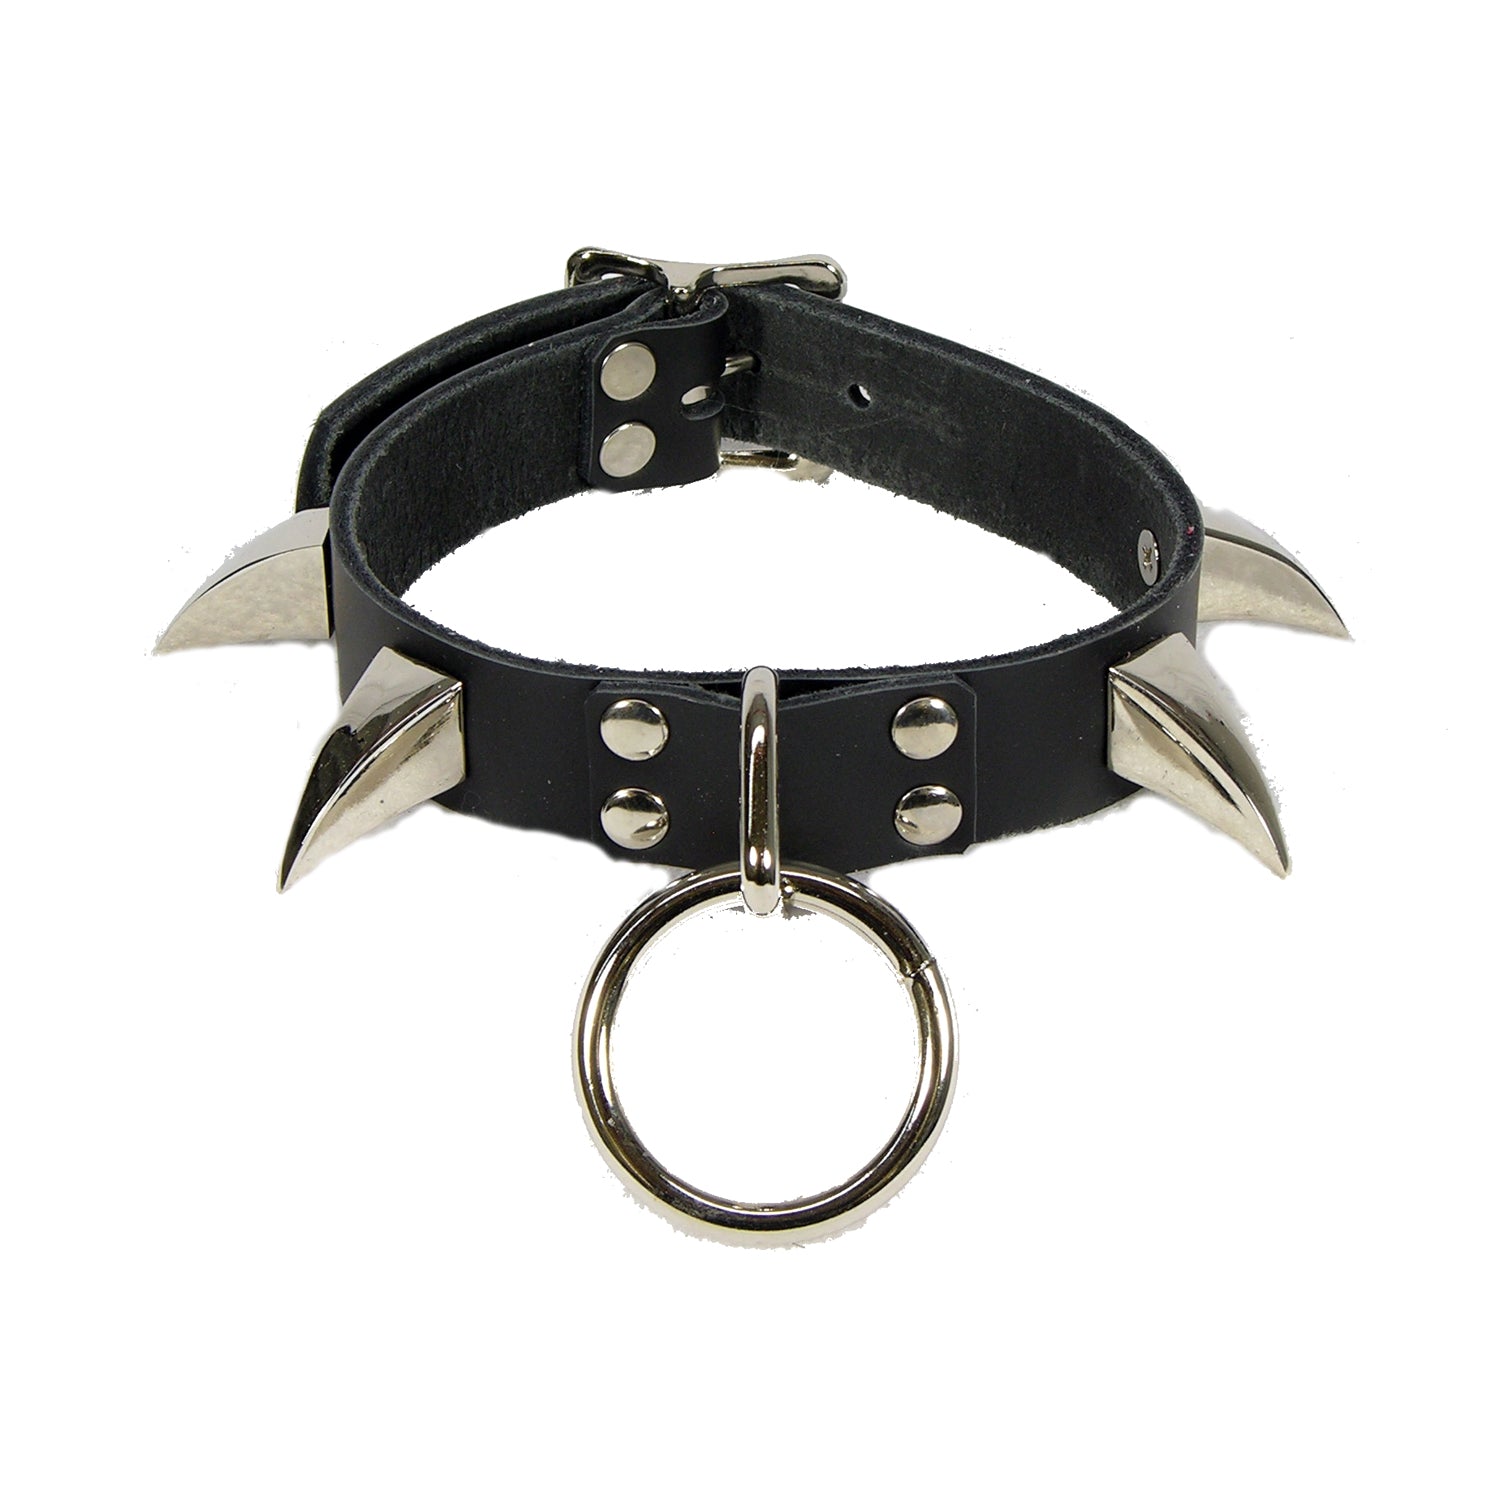 Ringed Claw Collar - Pawstar Pawstar Leather Collar collar, cosplay, costume, furry, leather, ship-15, ship-15day